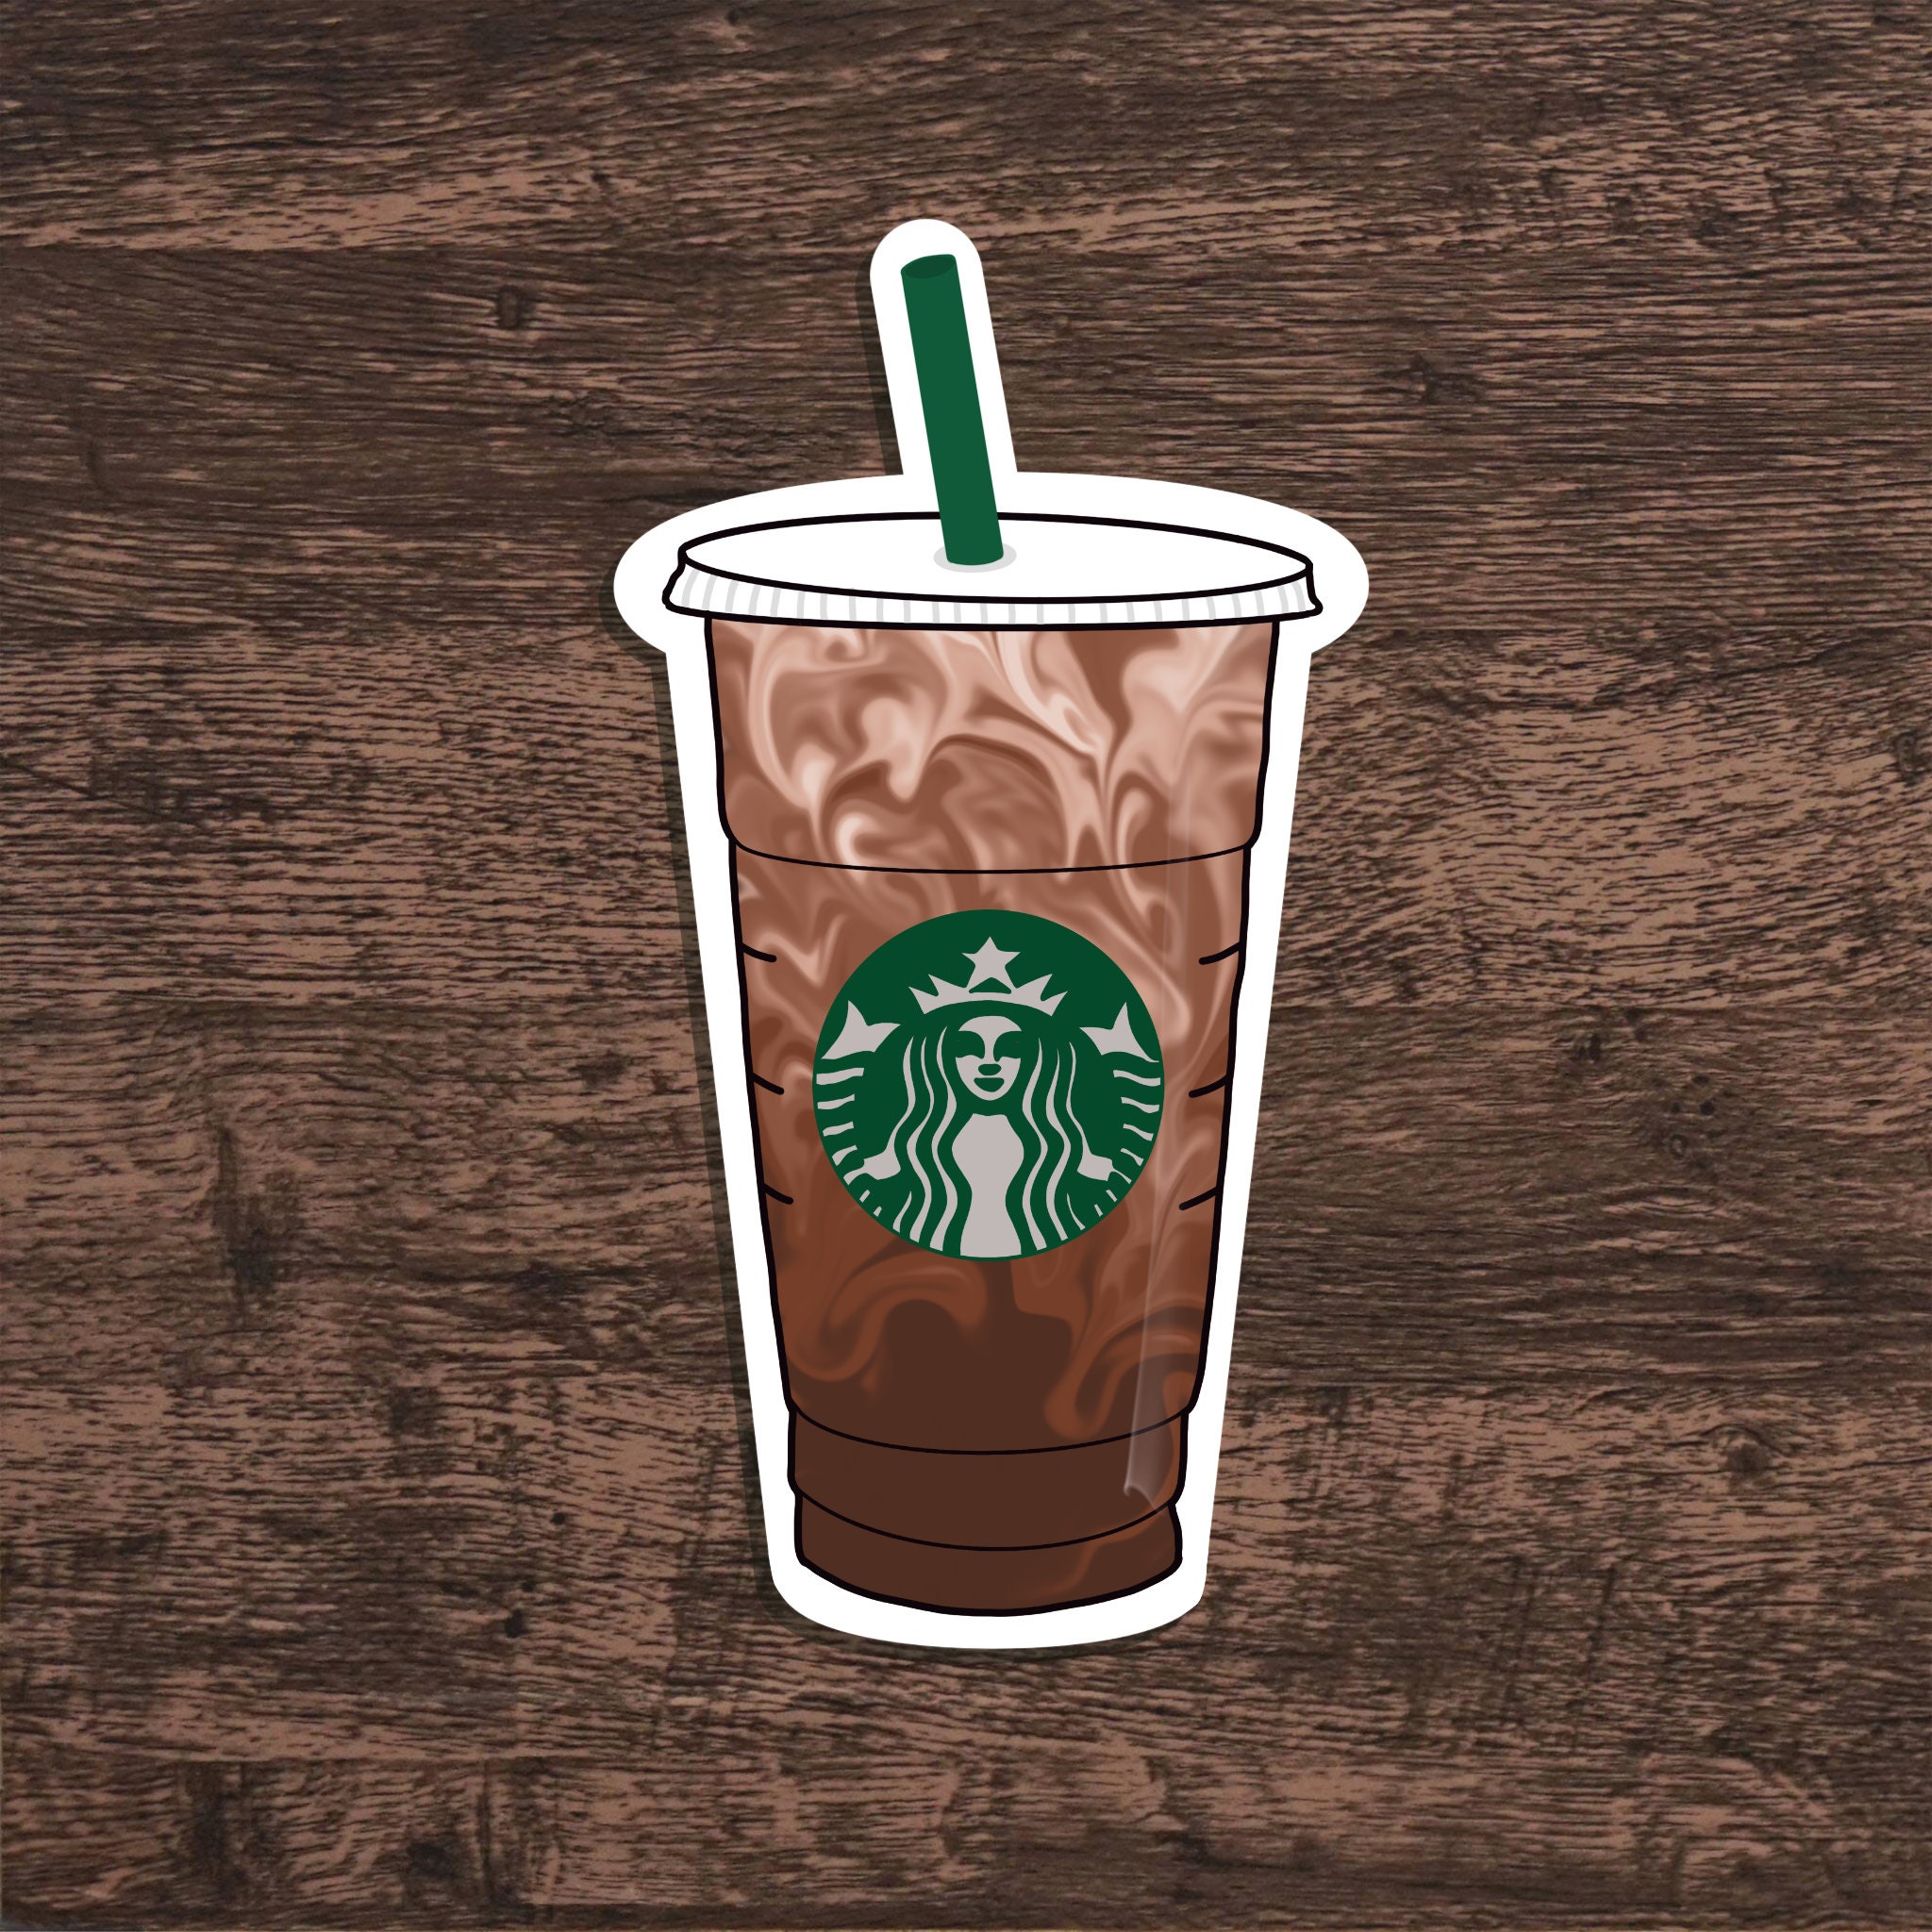 Iced Coffee Cup Sticker Latte Coffee Cup Sticker Starbucks Etsy